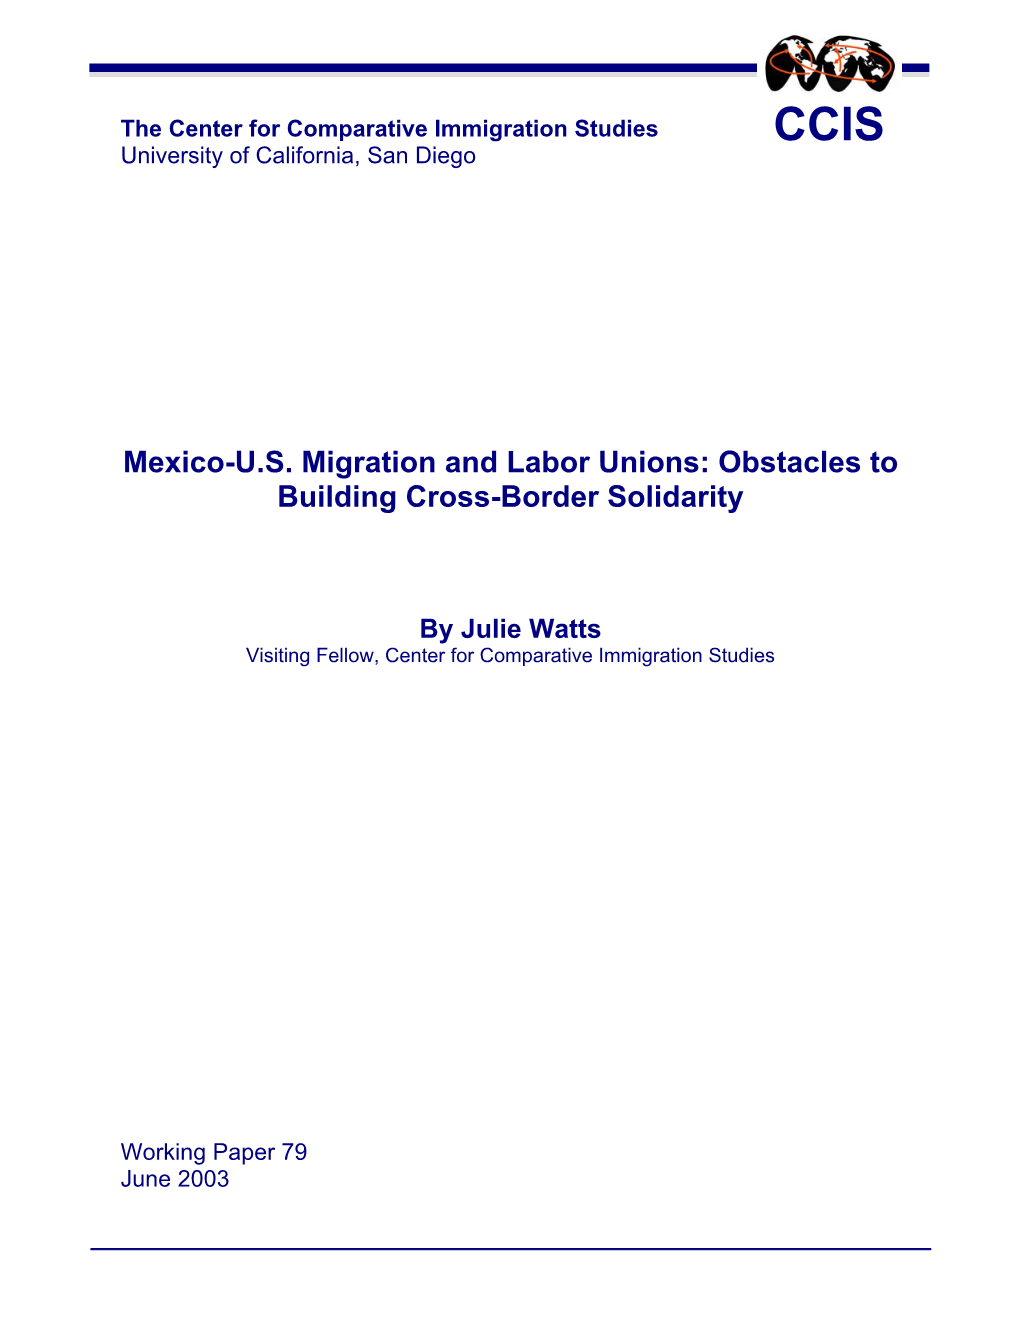 Mexico-US Migration and Labor Unions